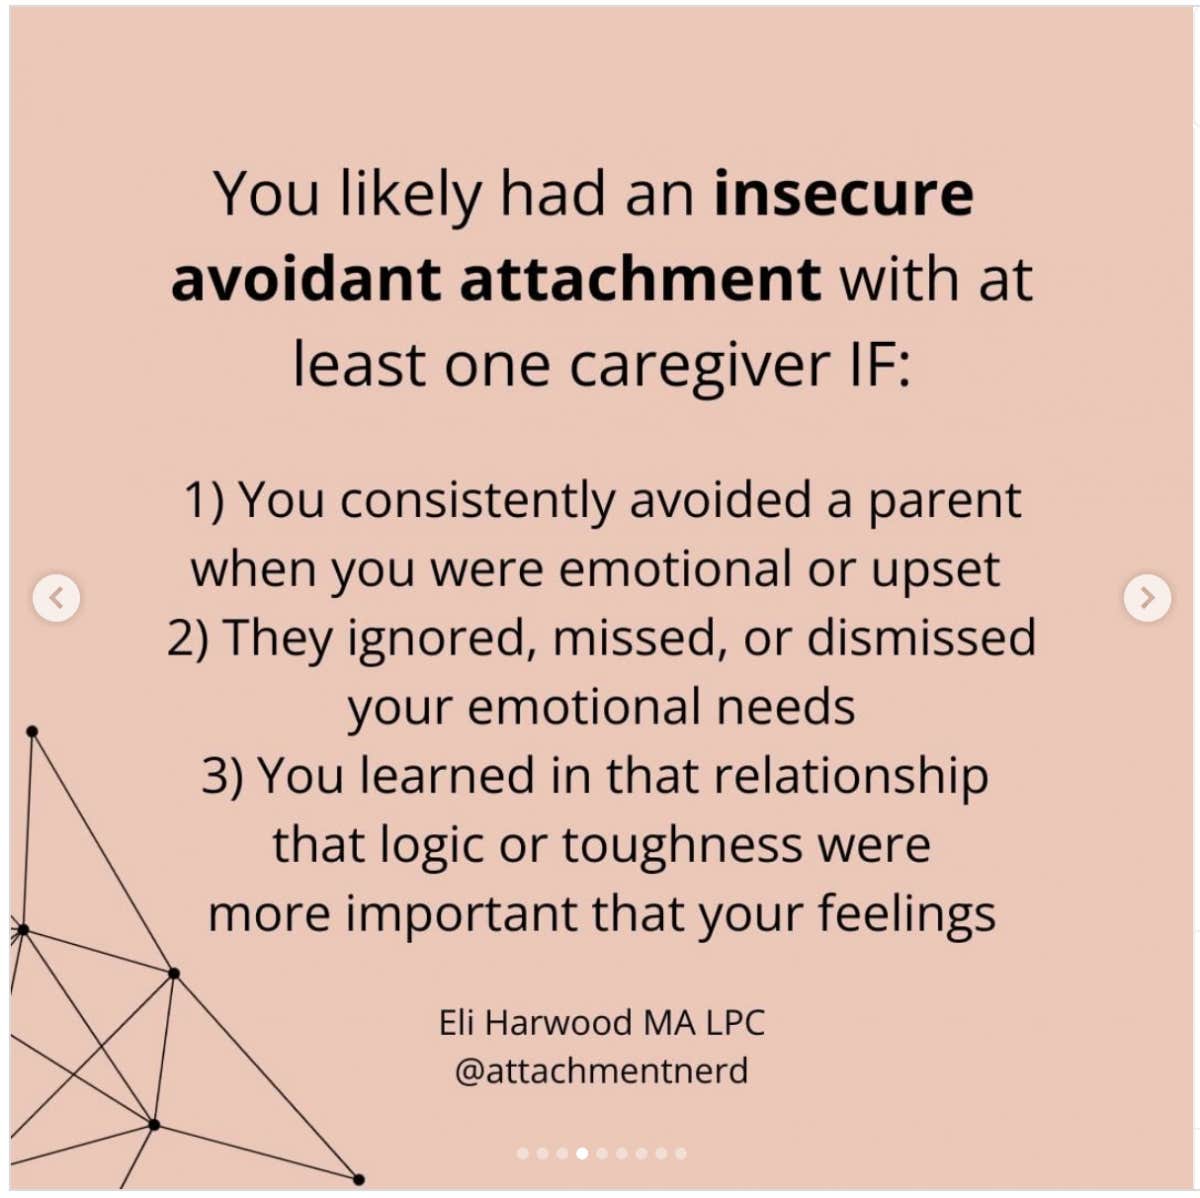 Eli Harwood on Insecure Avoidant attachment